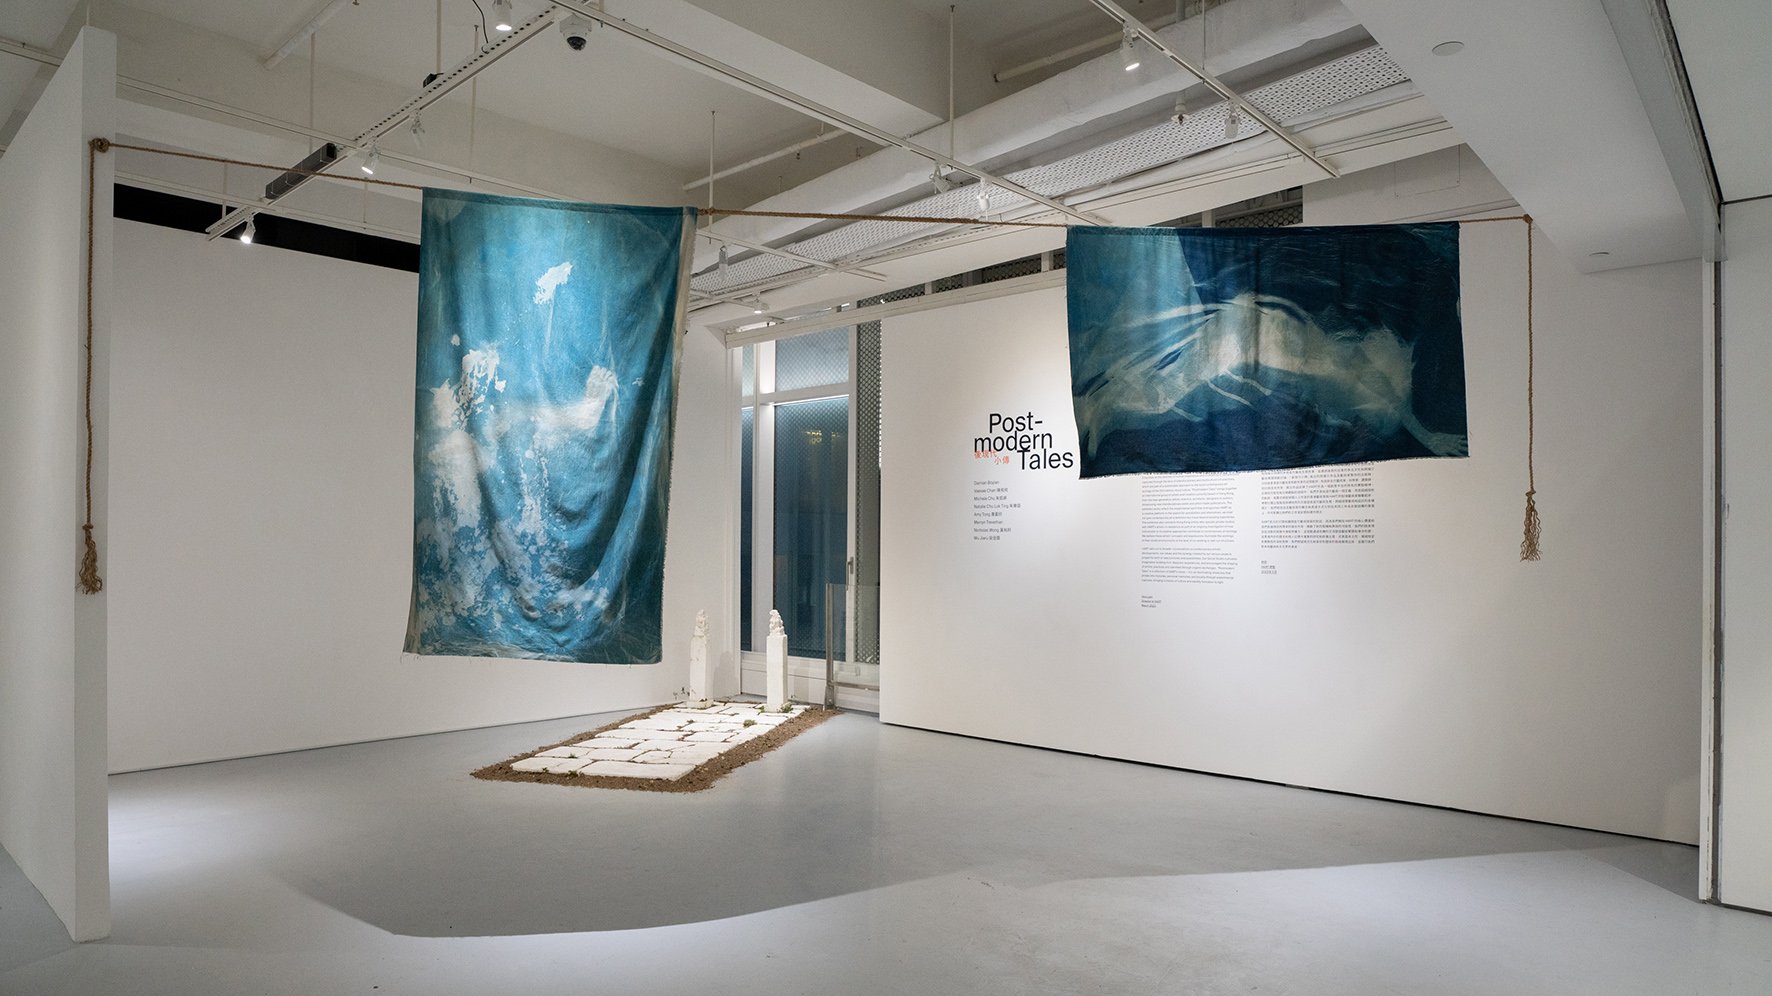 Installation view of "Postmodern Tales", H Queen's, Hong Kong